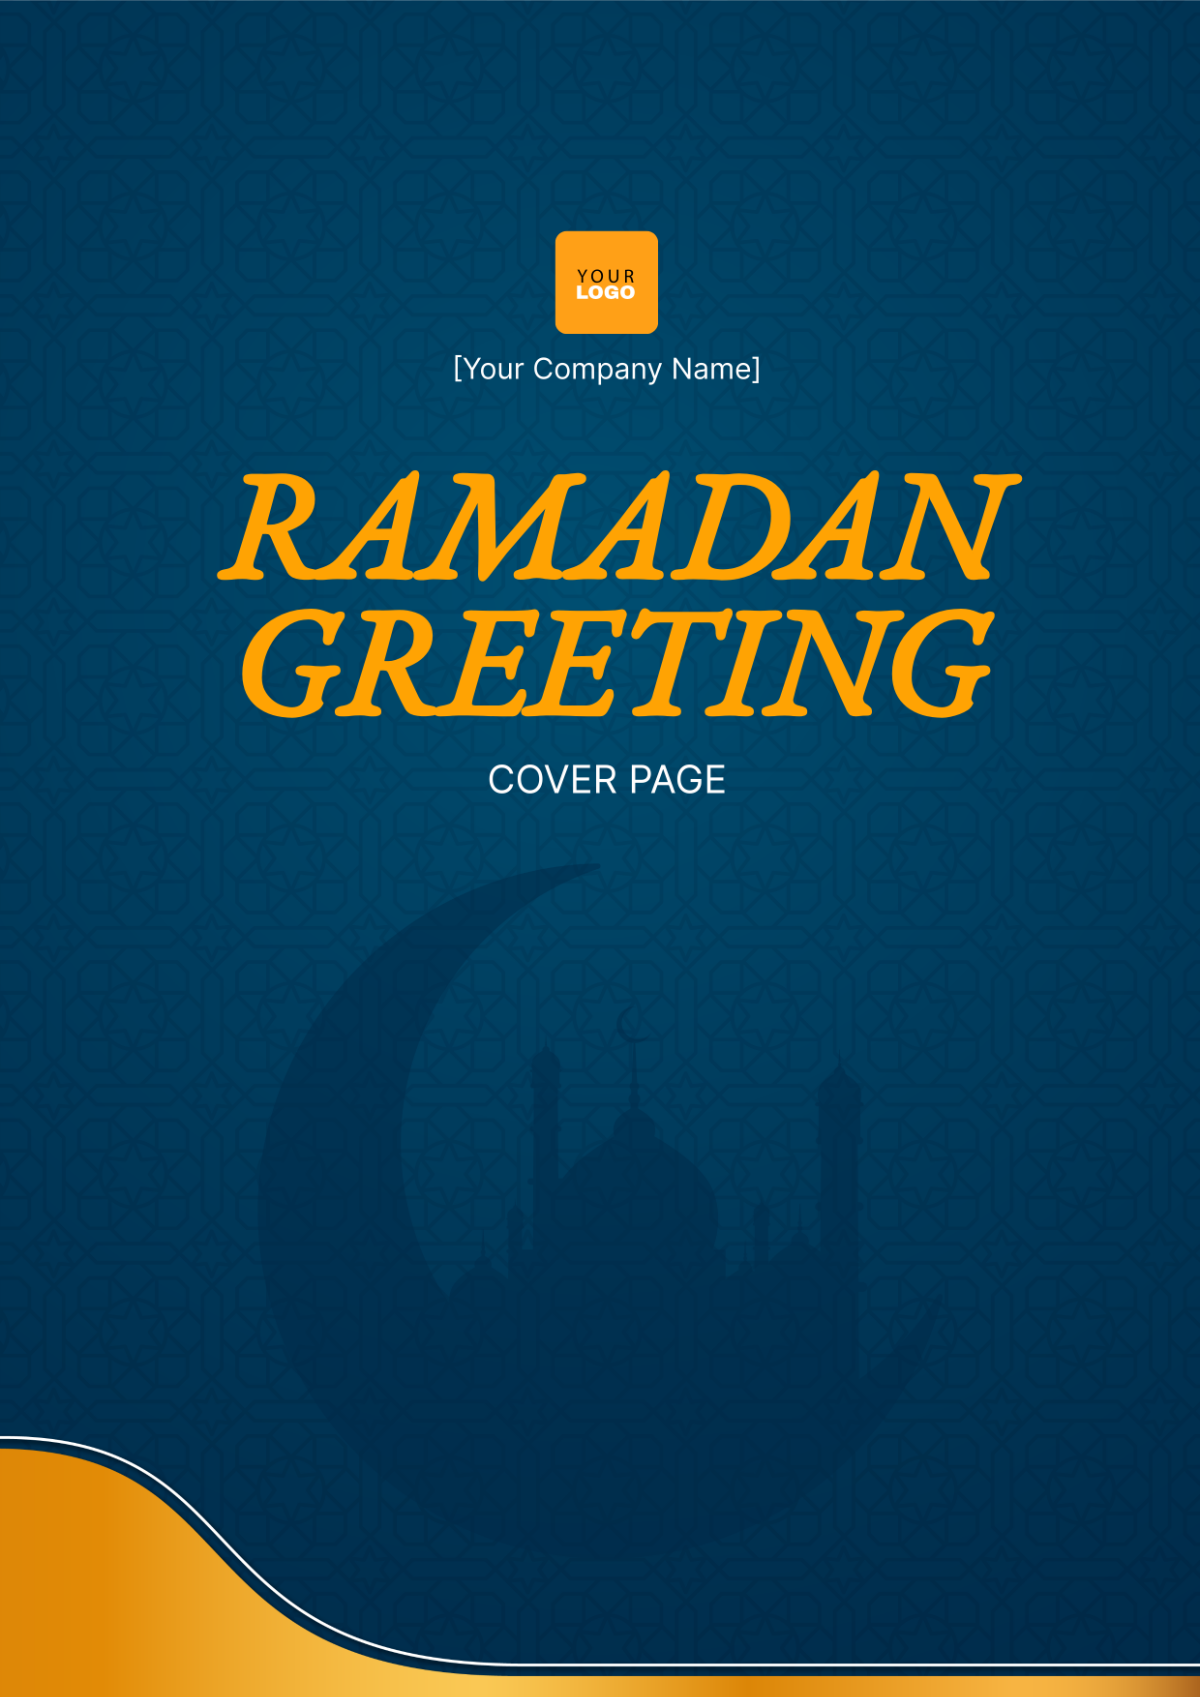 Ramadan Greeting Cover Page Template